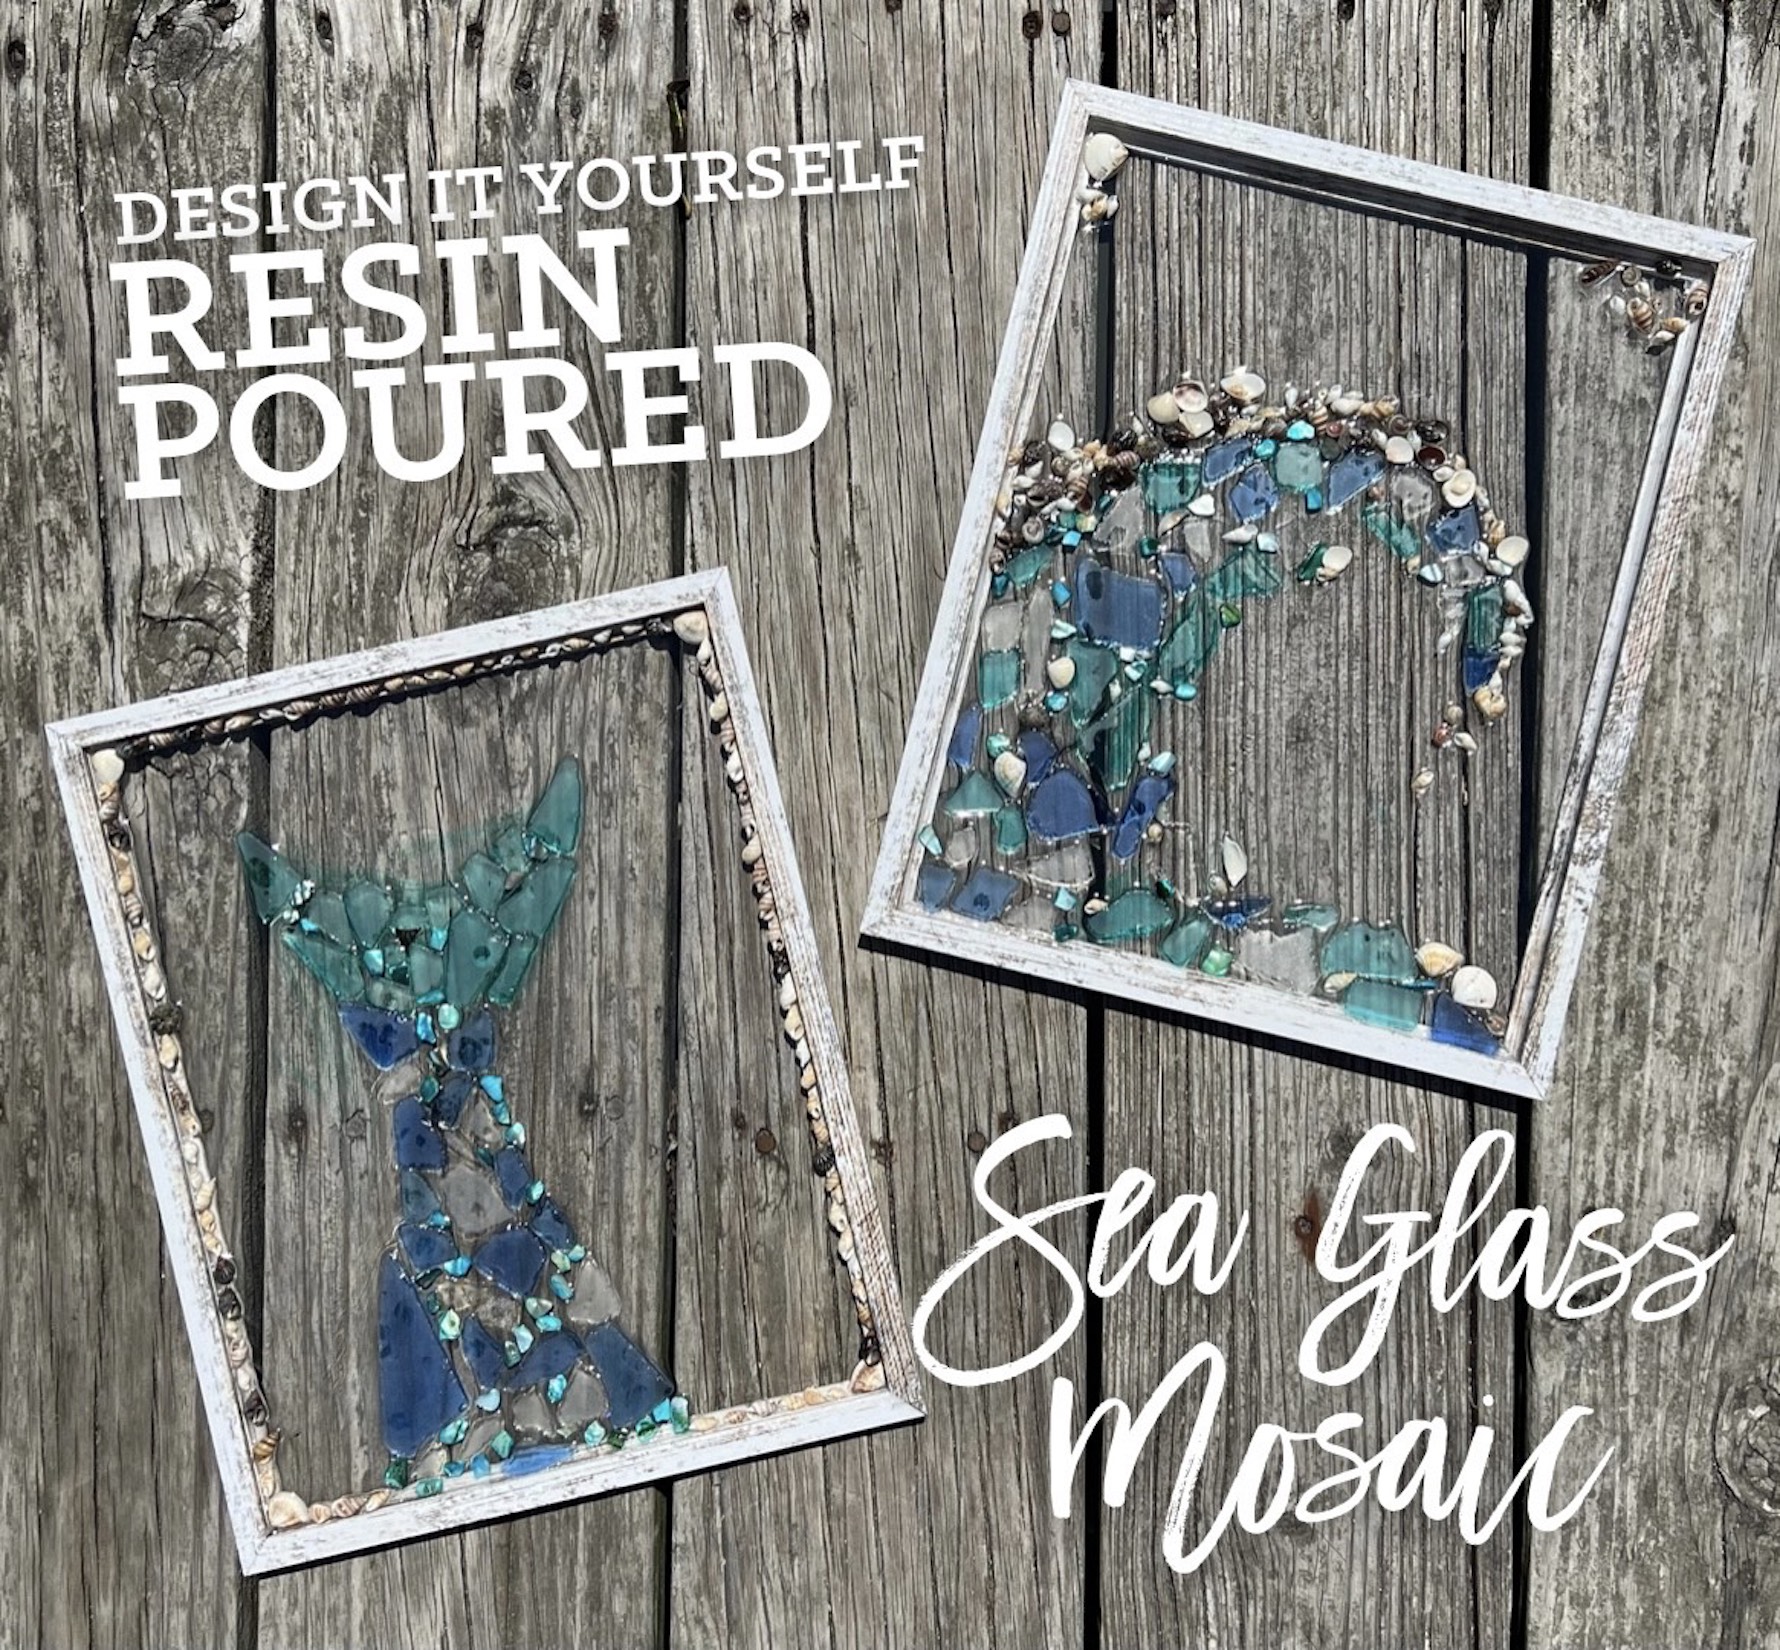 NEW! Resin Poured Sea Glass Mosaic Workshop | 6:30-8:30pm